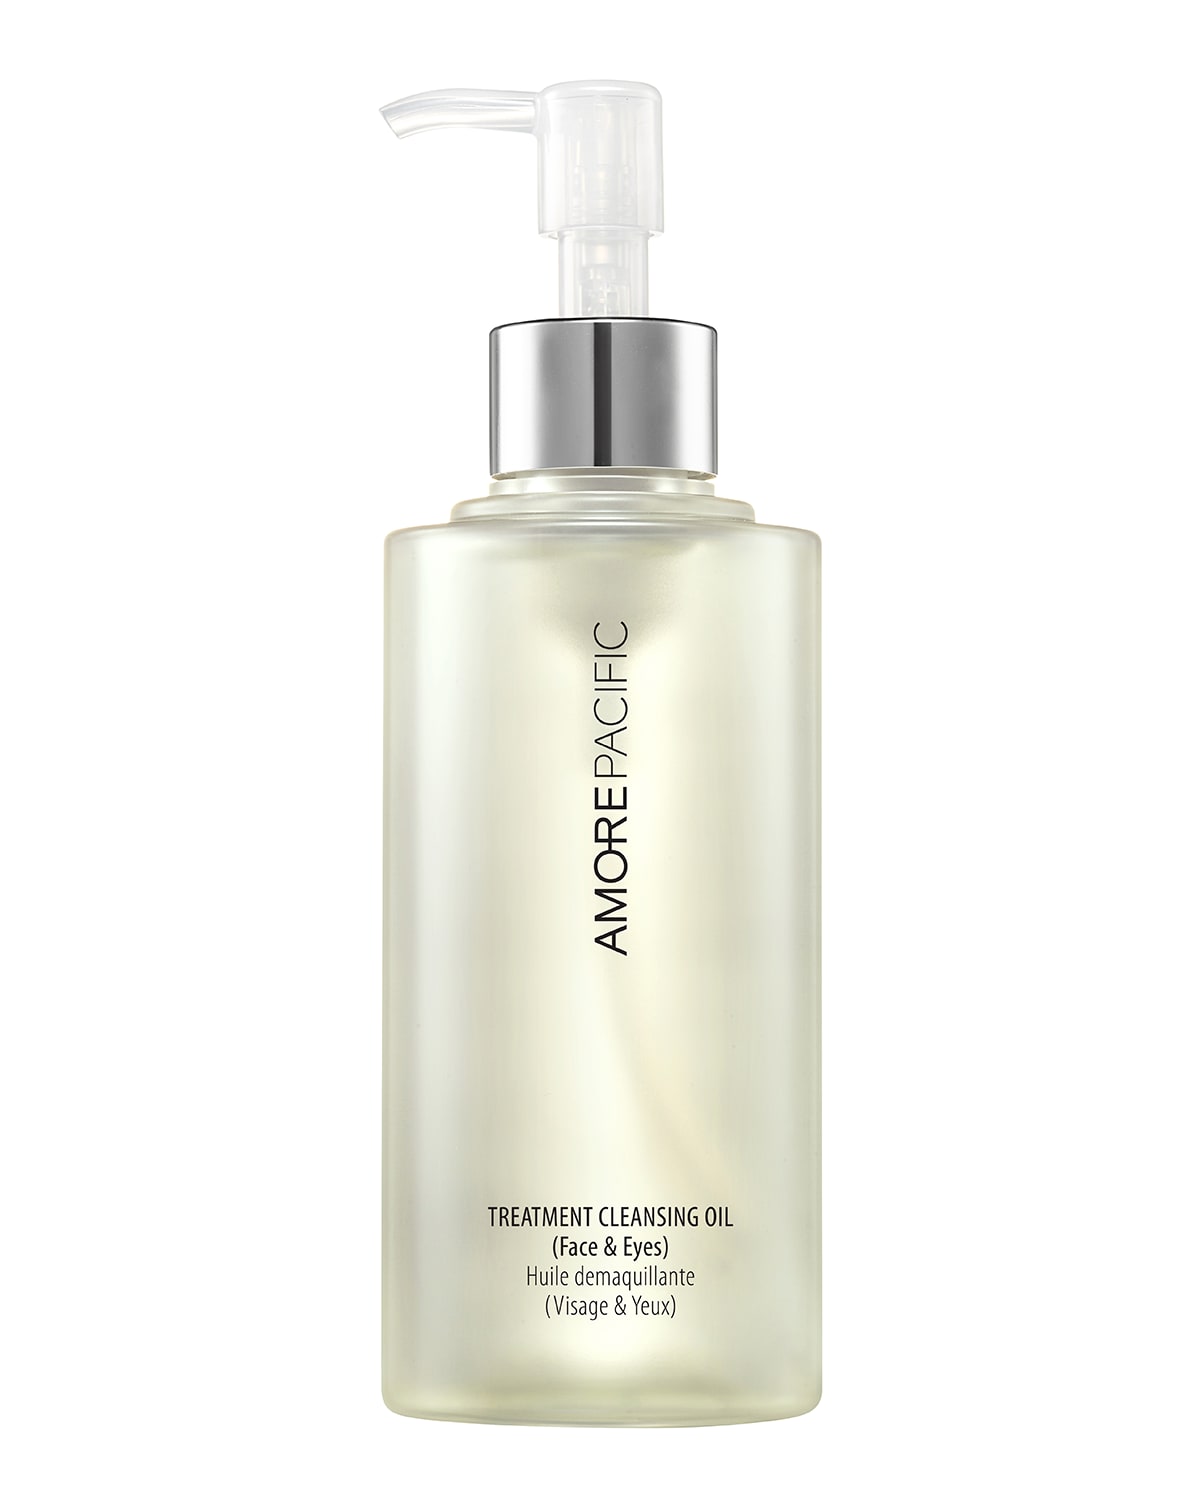 AMOREPACIFIC Treatment Cleansing Oil, 6.8 oz.